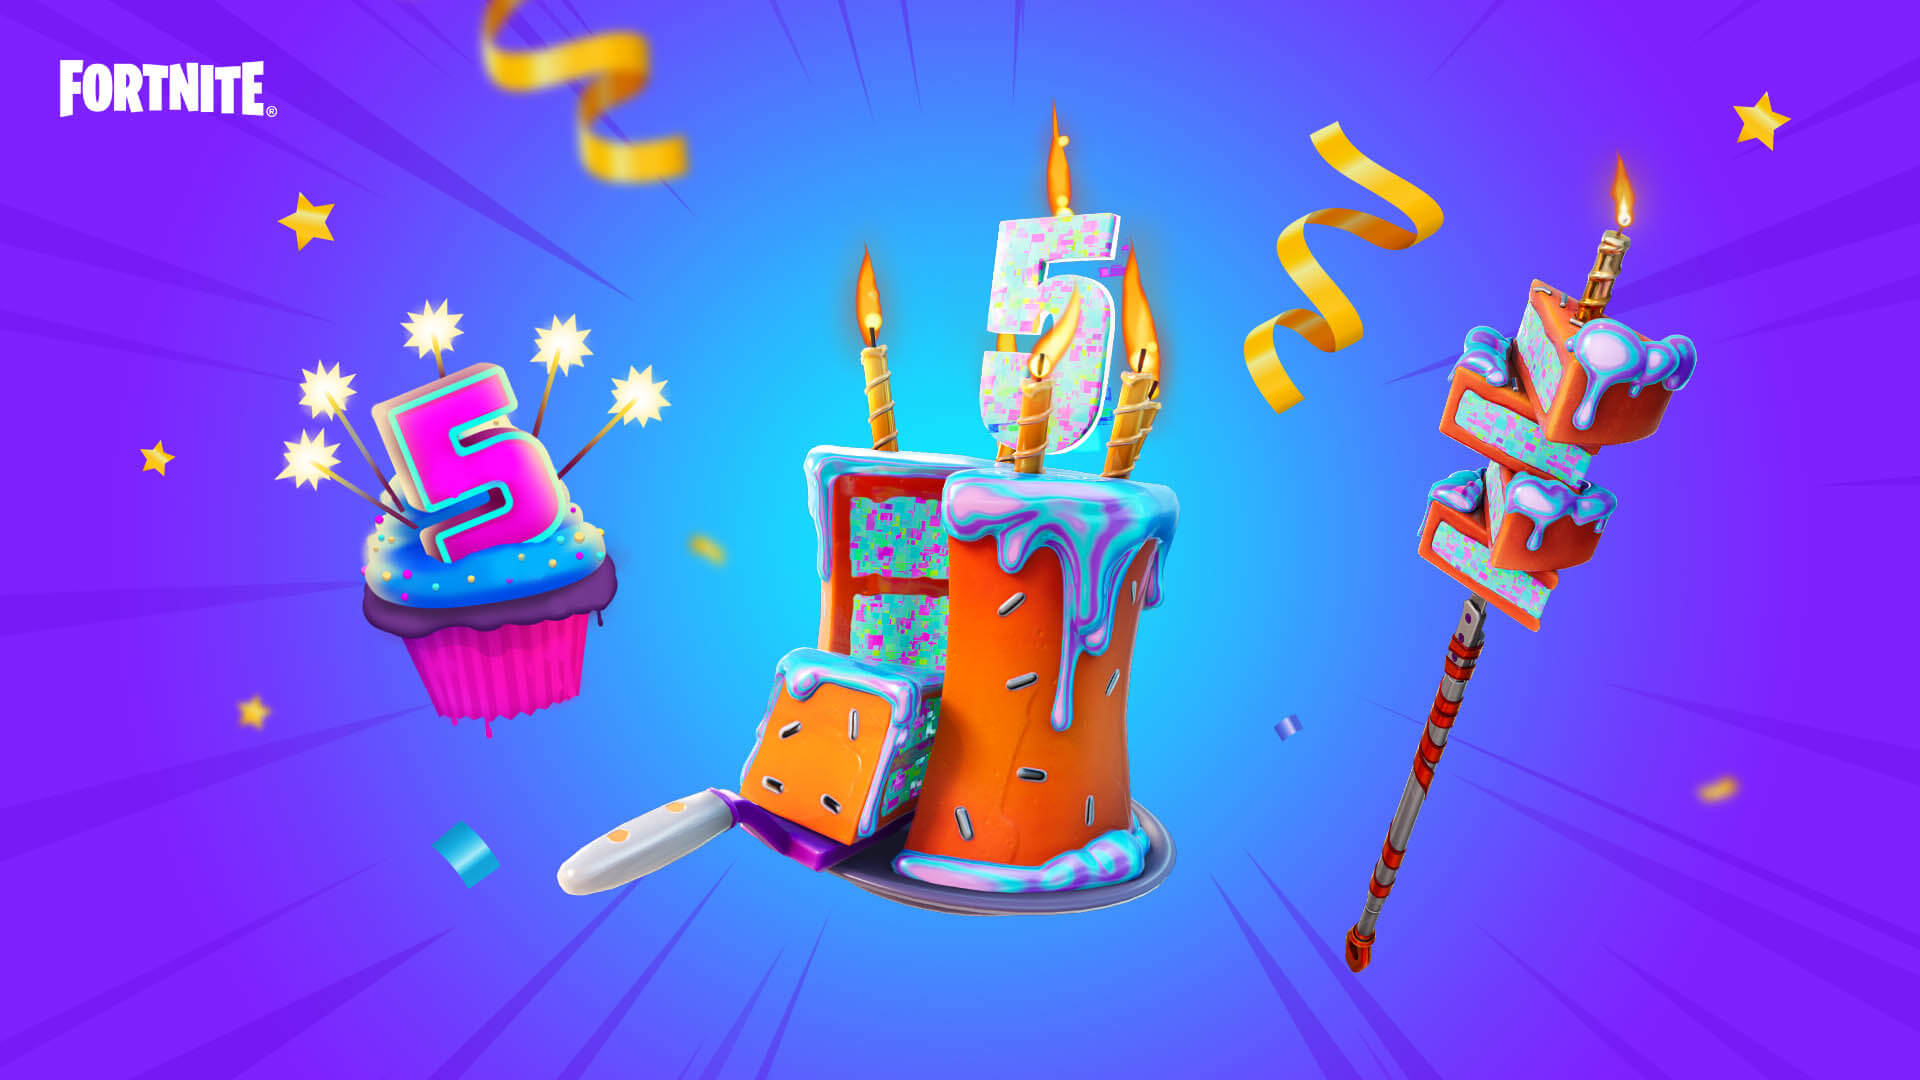 A promotional image from Fortnite showing different birthday cosmetics like a cake pickaxe and back bling